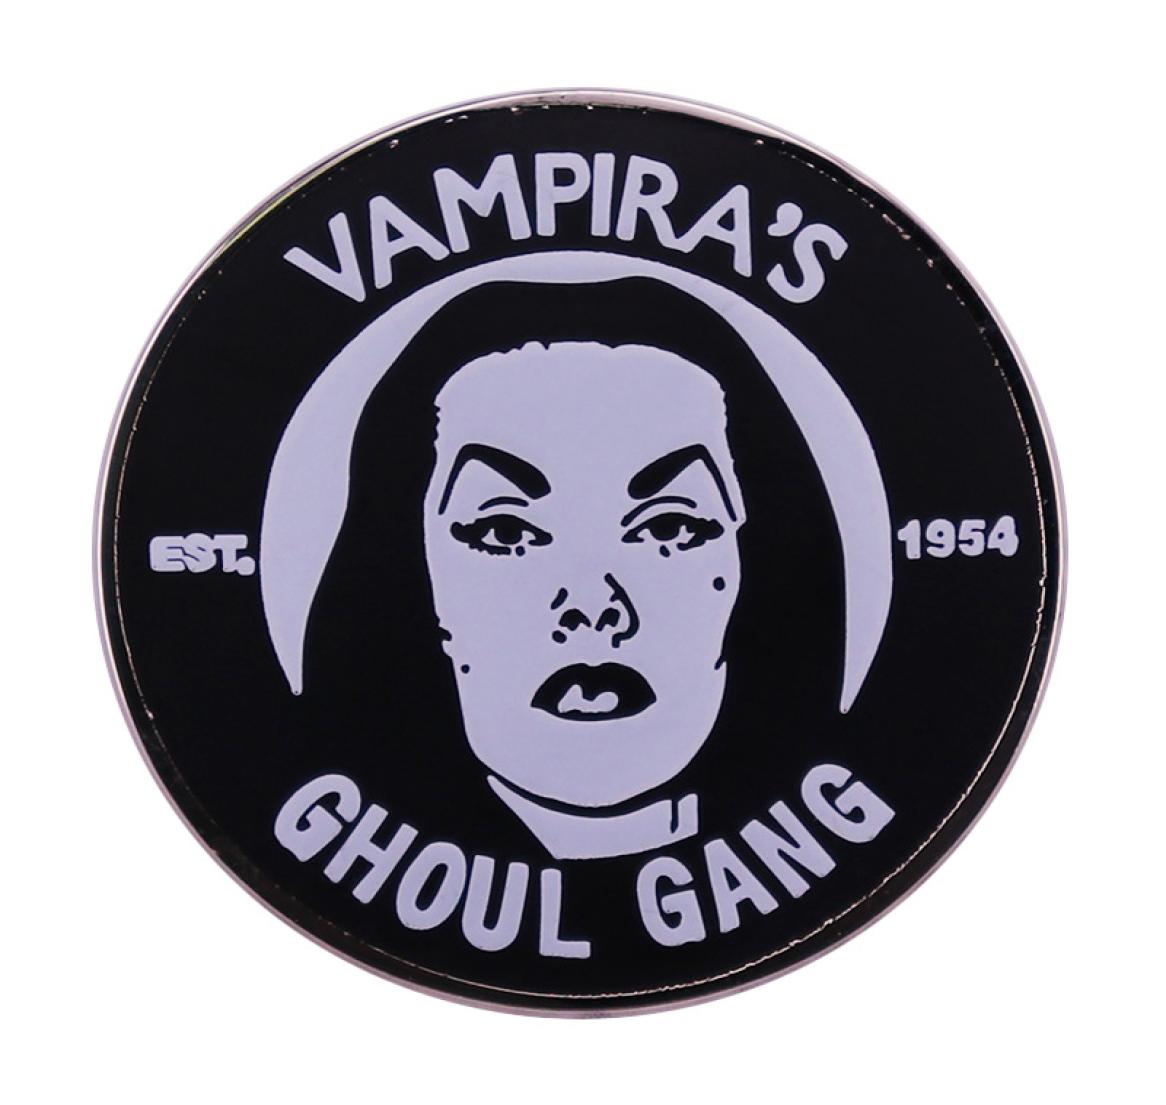 

Vampira039s Ghoul Gang Enamel Pin Brooch Punk Horror Gothic Badge Halloween Spooky Jewelry Decor7542555, Red